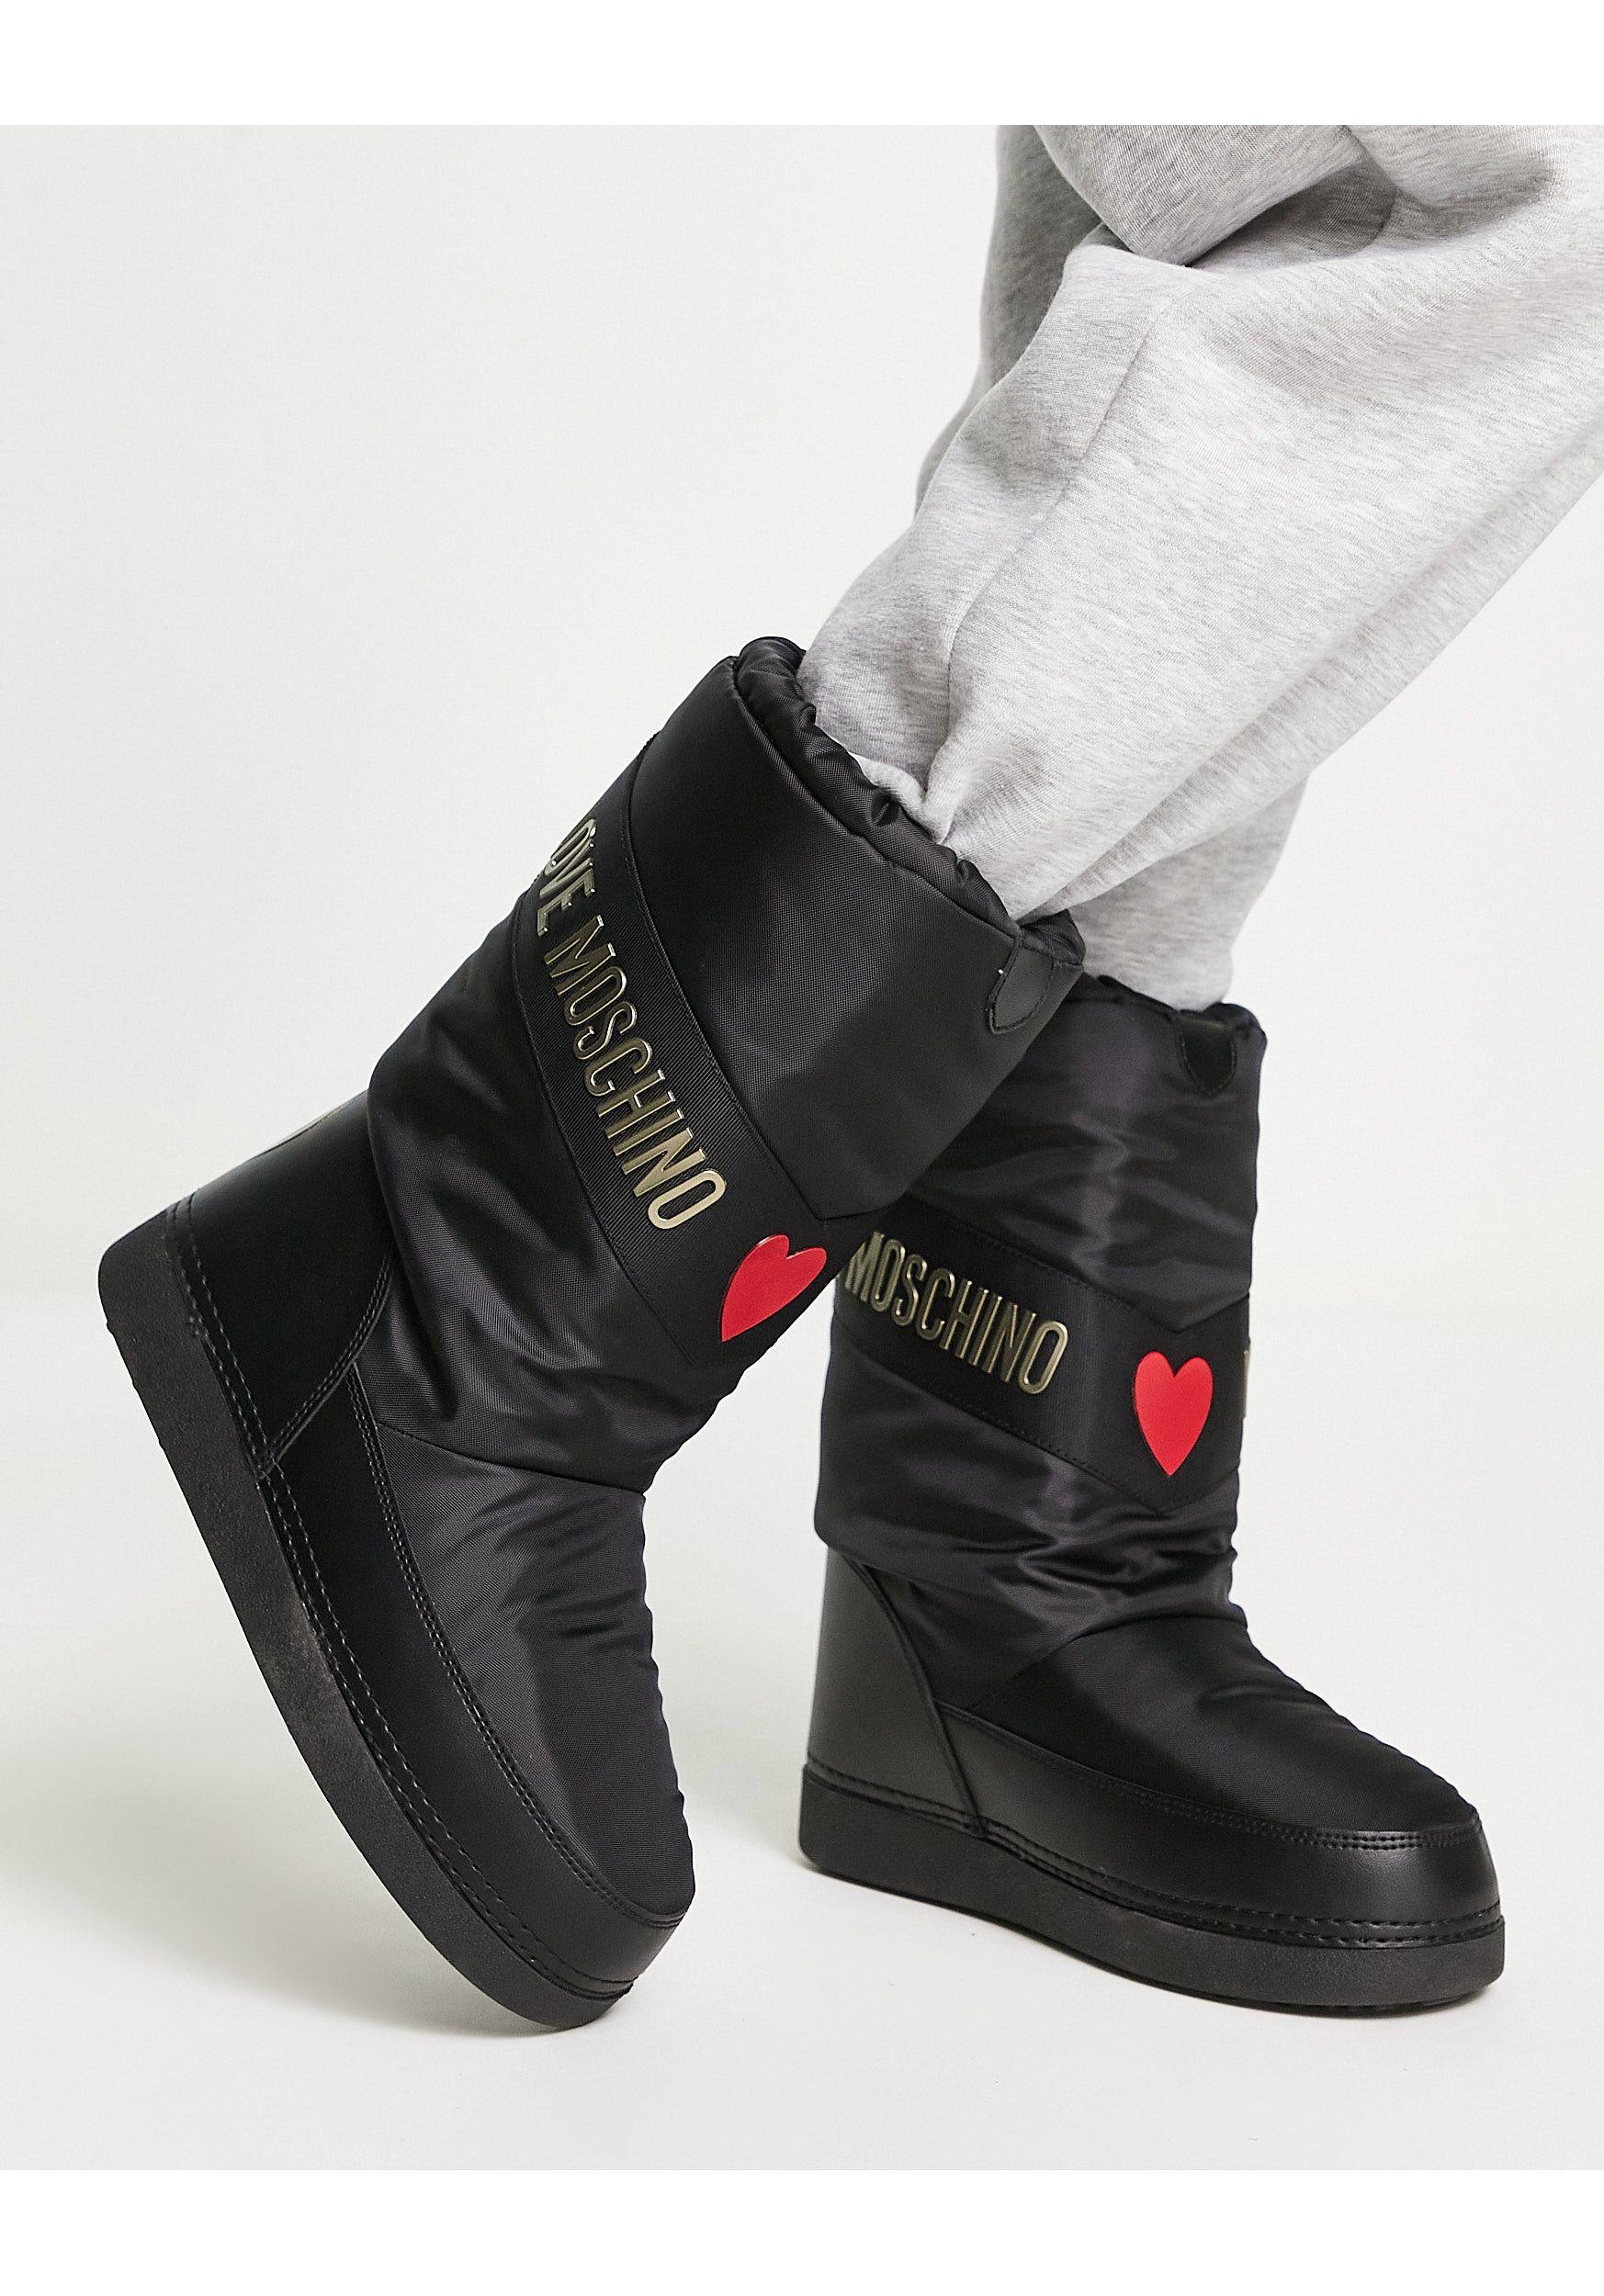 Love Moschino Classic Snow Boots in Black | Lyst